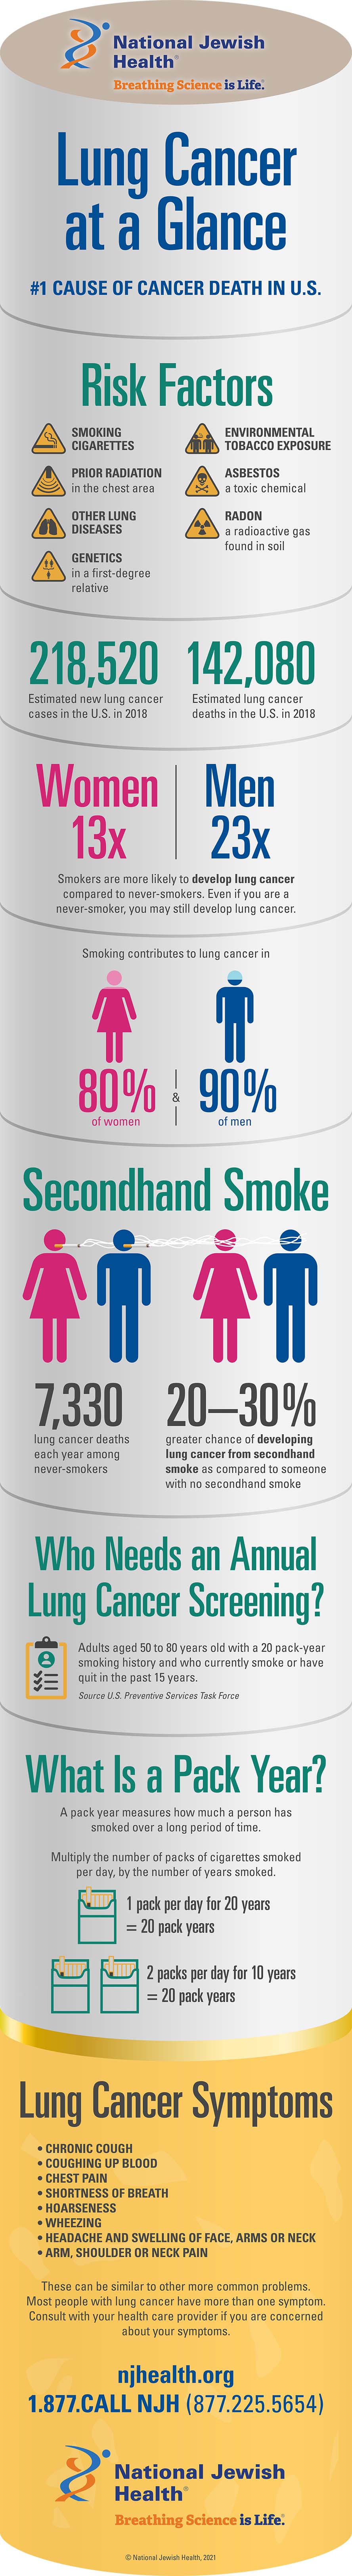 Lung Cancer at a Glance Infographic